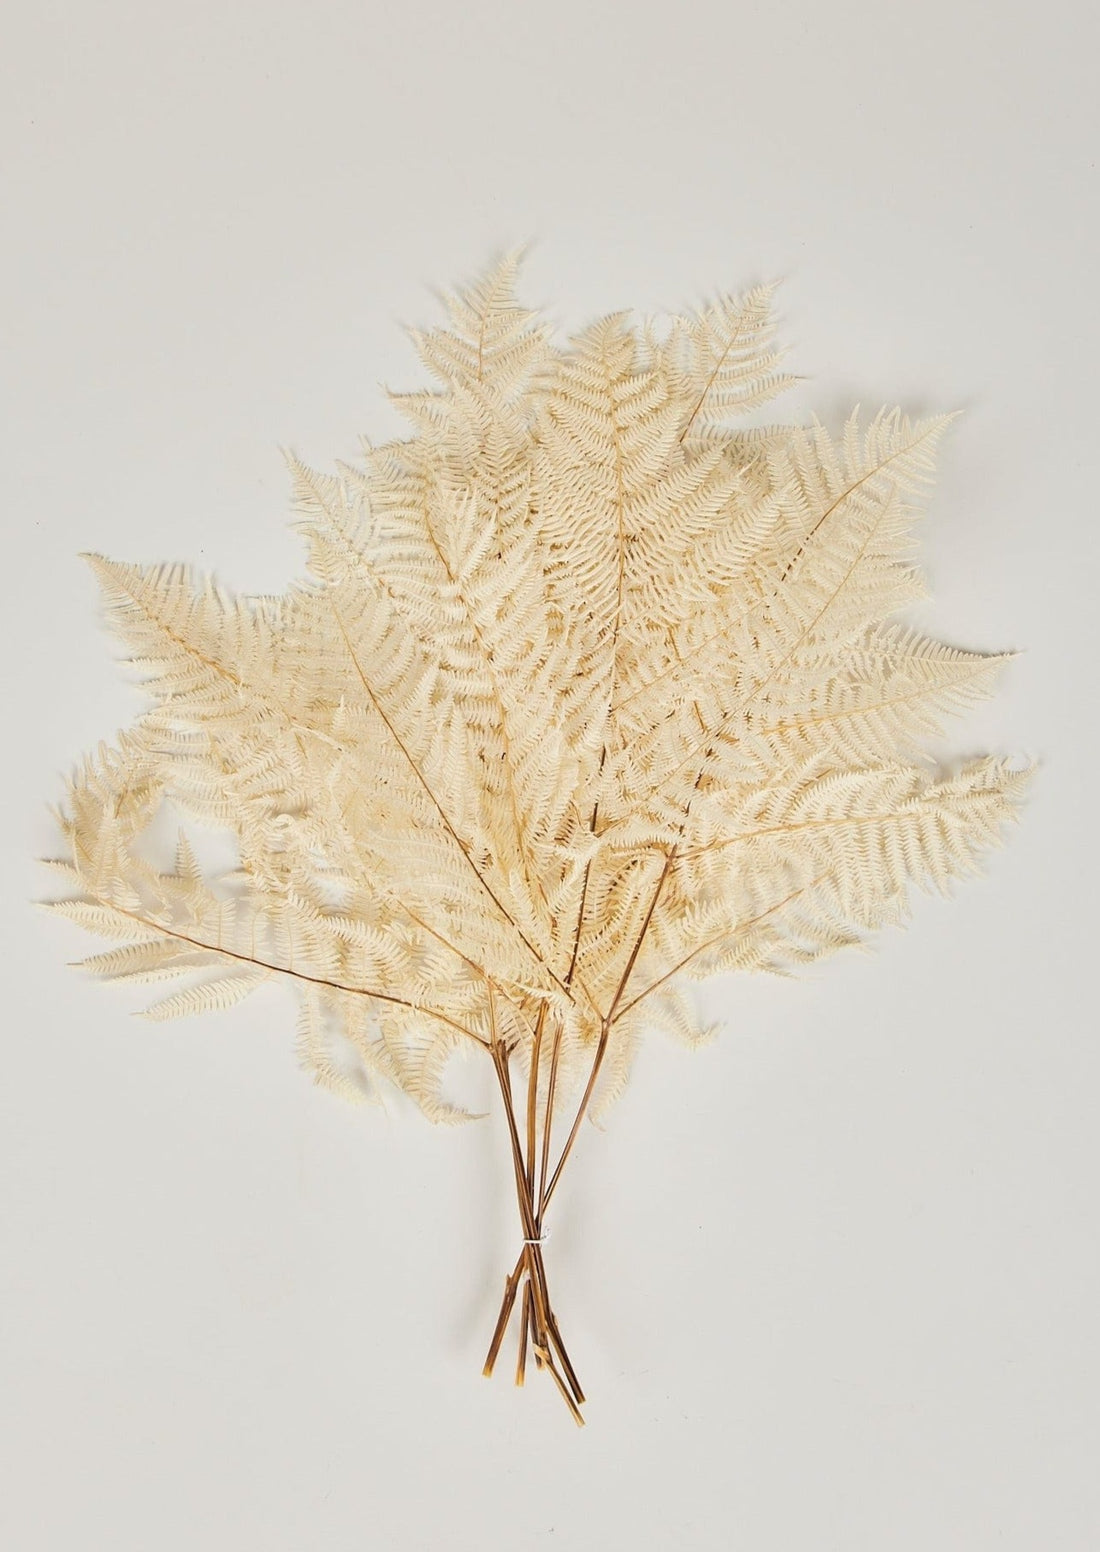 Afloral Dried Accents Bleached White Fern Leaf Bundle